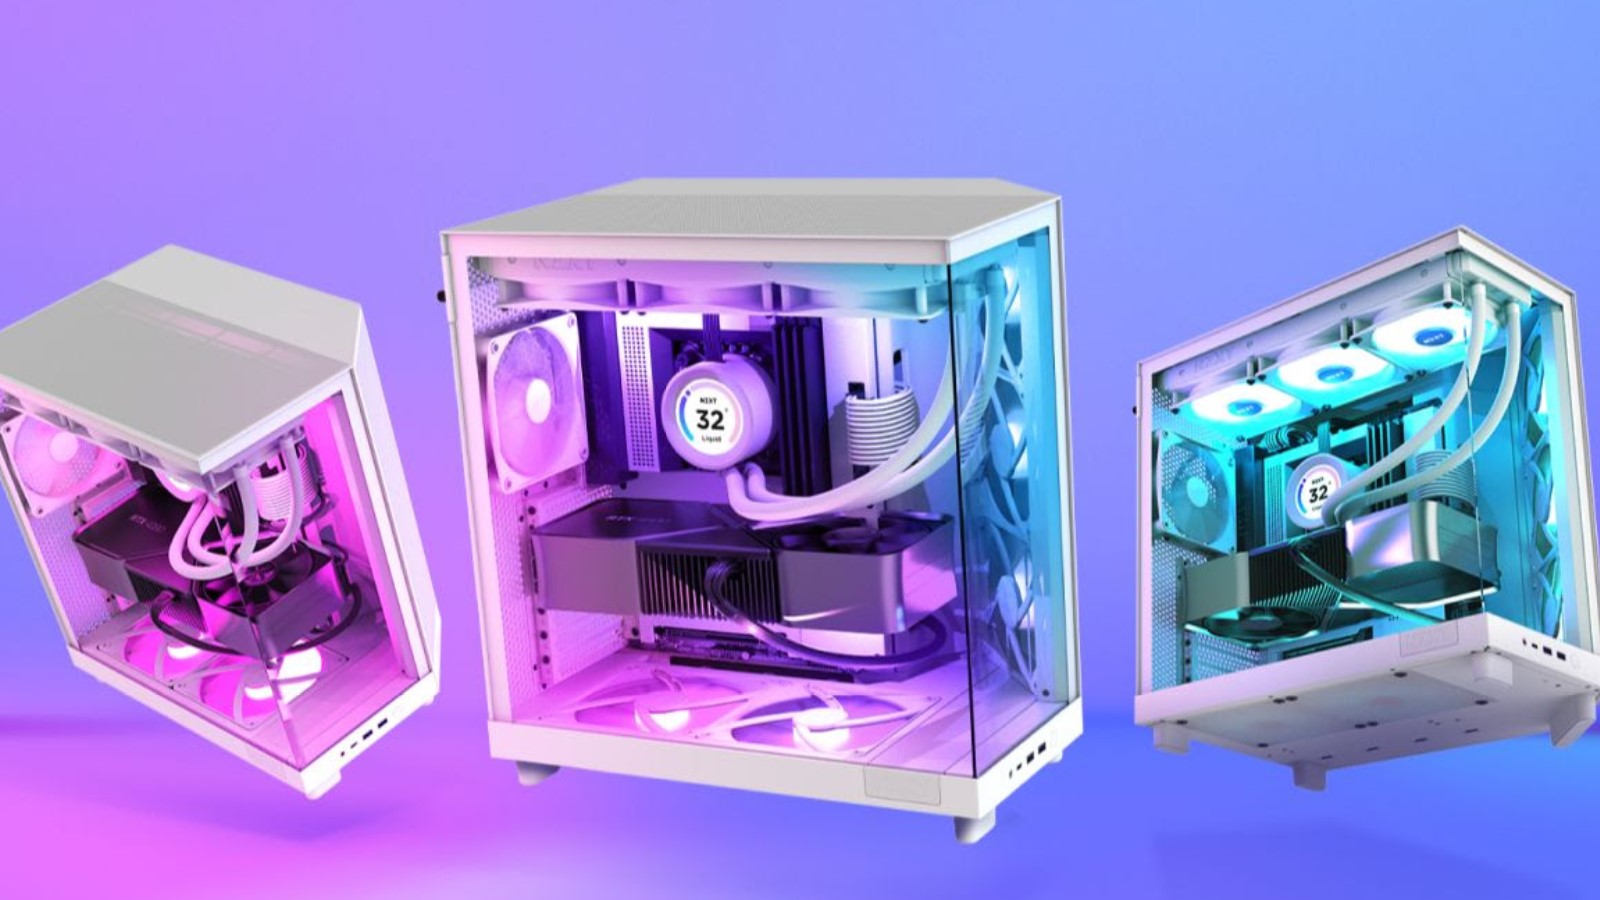 NZXT unveils the H6 Flow, a compact dual chamber mid-tower ATX